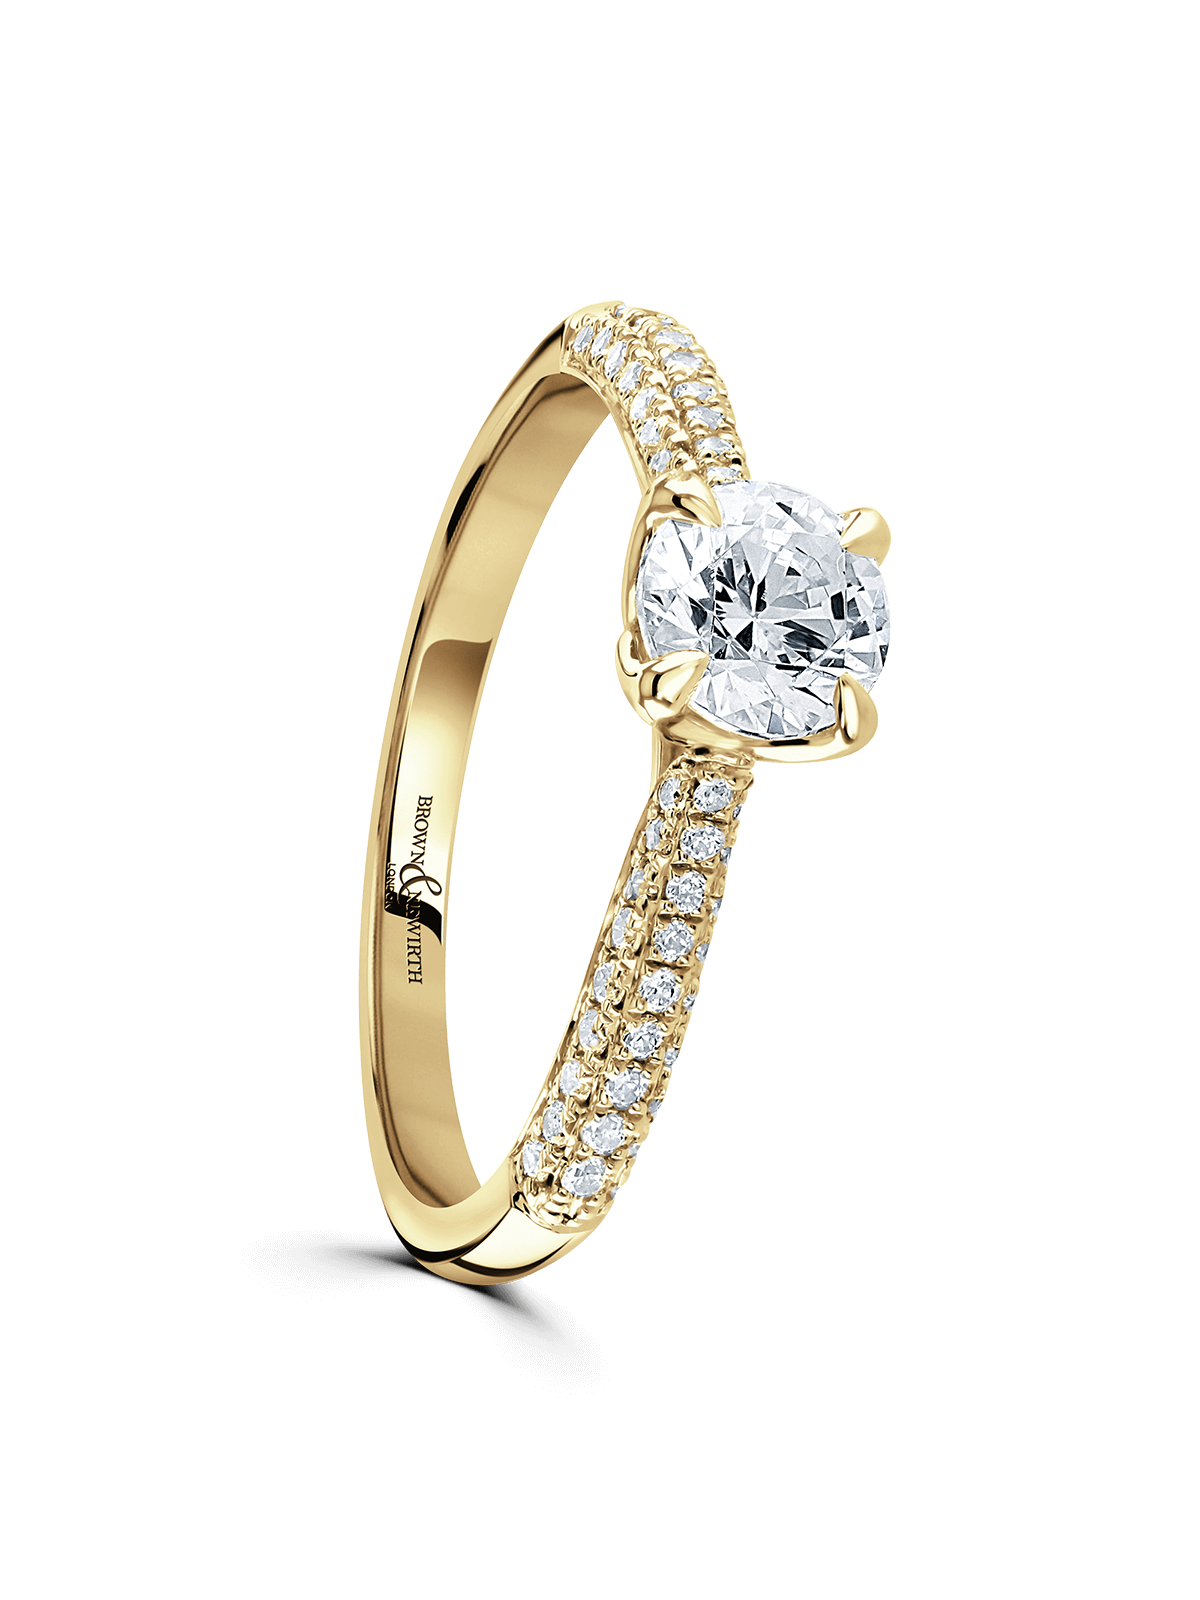 Brown & Newirth Leilani 0.70ct Brilliant Cut Certificated Diamond Solitaire Engagement Ring in 18ct Yellow Gold with Diamond Set Shoulders